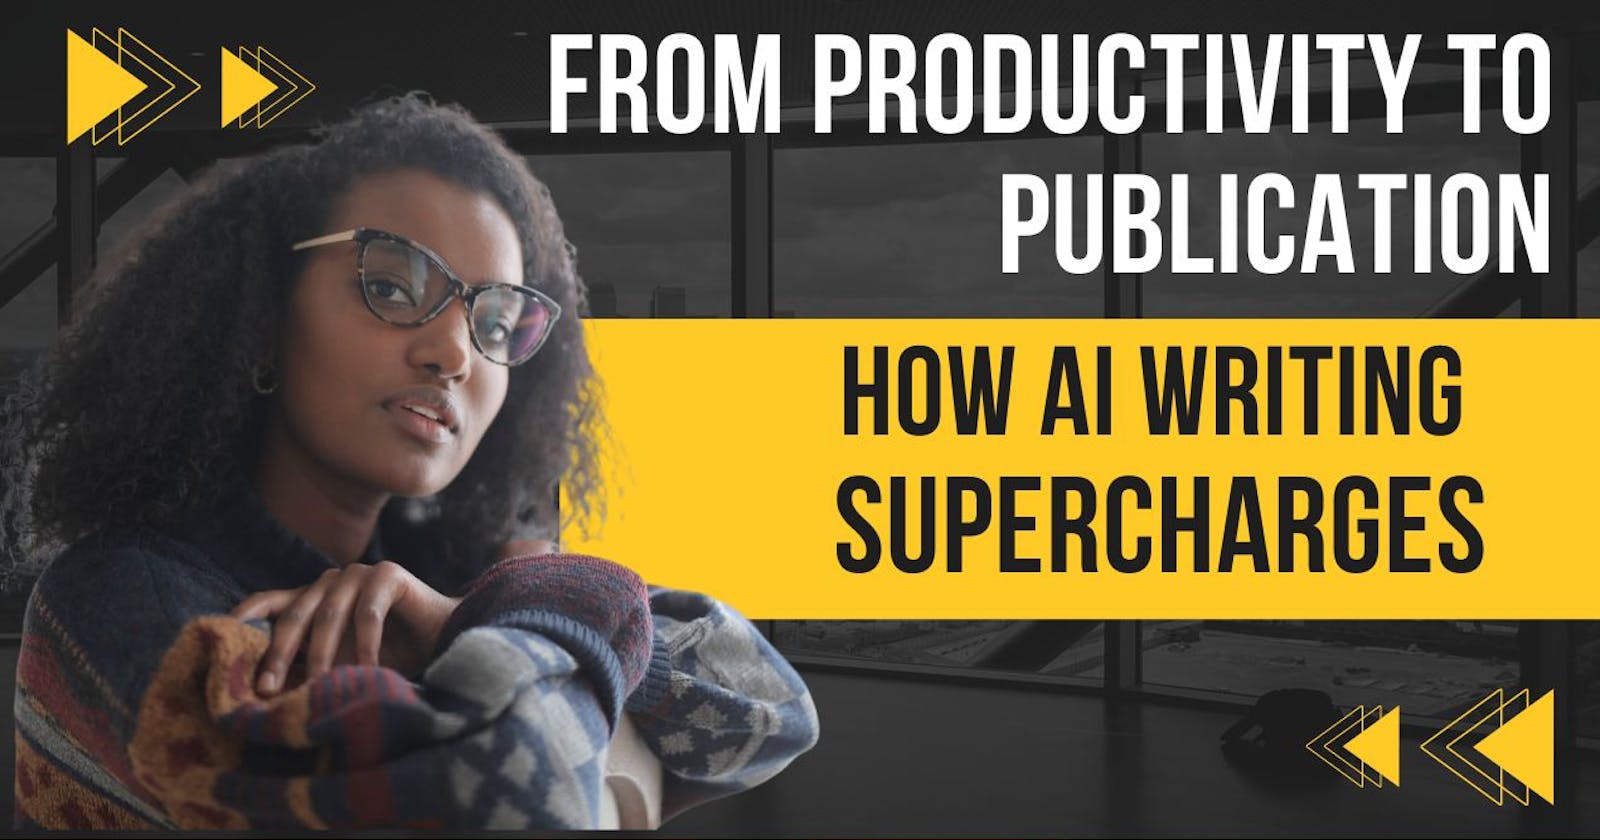 From Productivity to Publication: How AI Writing Supercharges Your Output